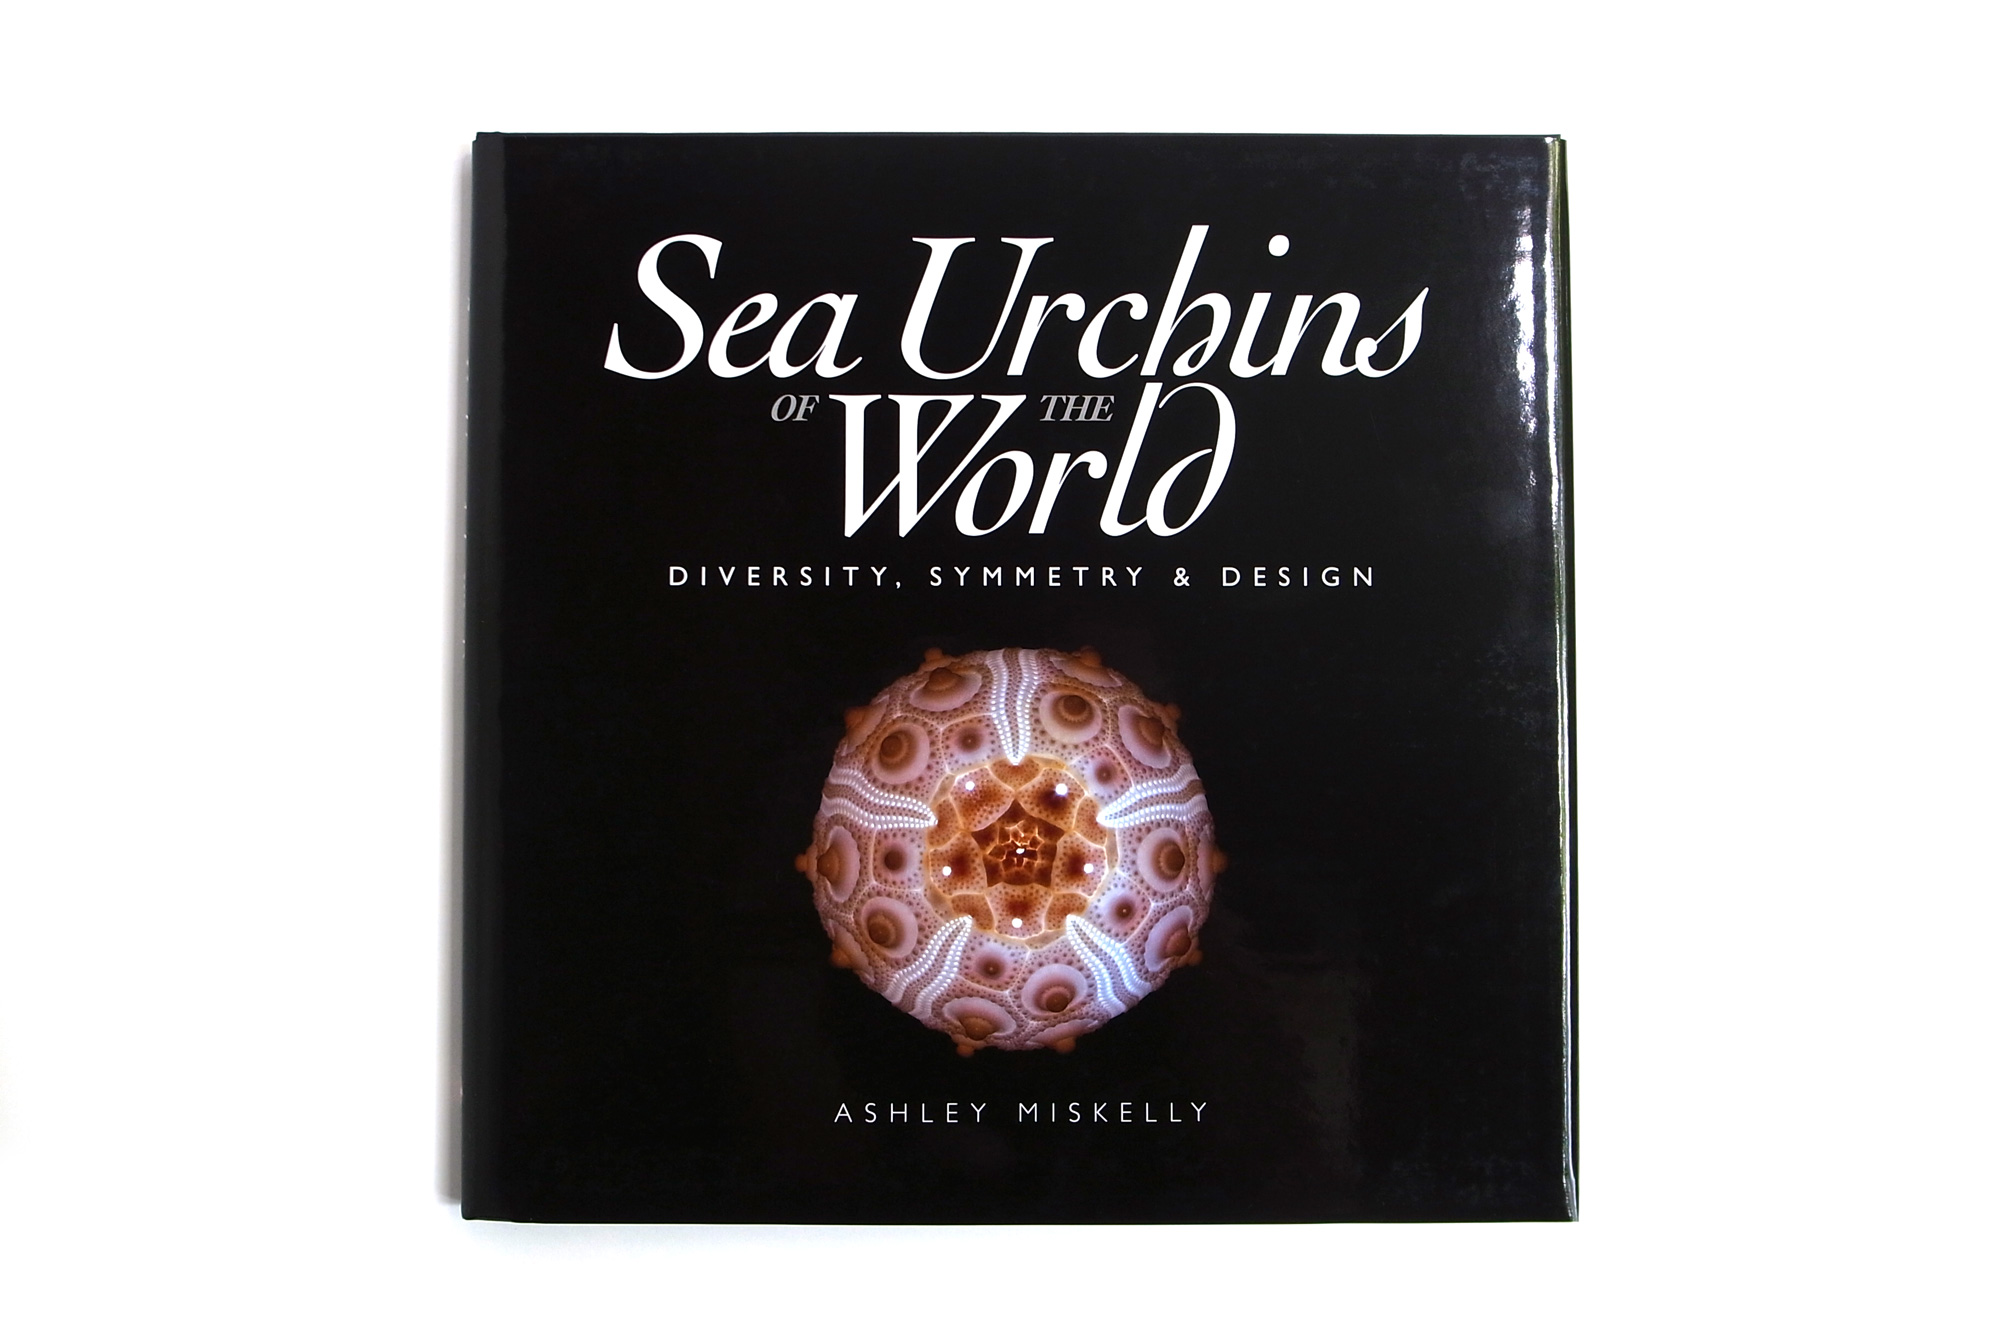 Sea Urchins of the World